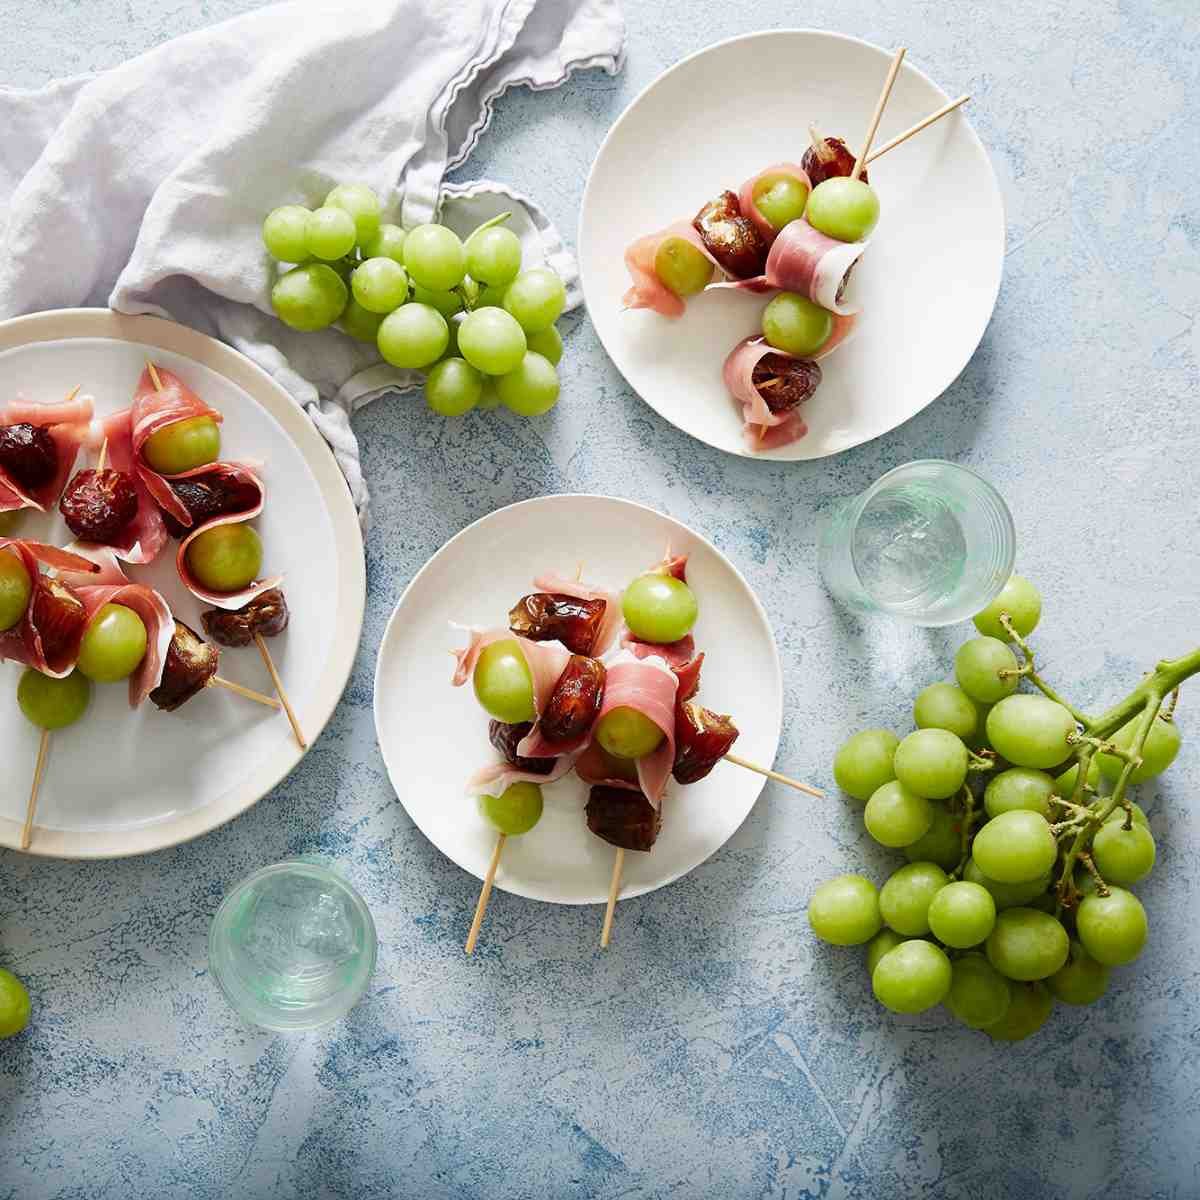 Autumn Crisp_Grape and Date Skewers with Prosciutto